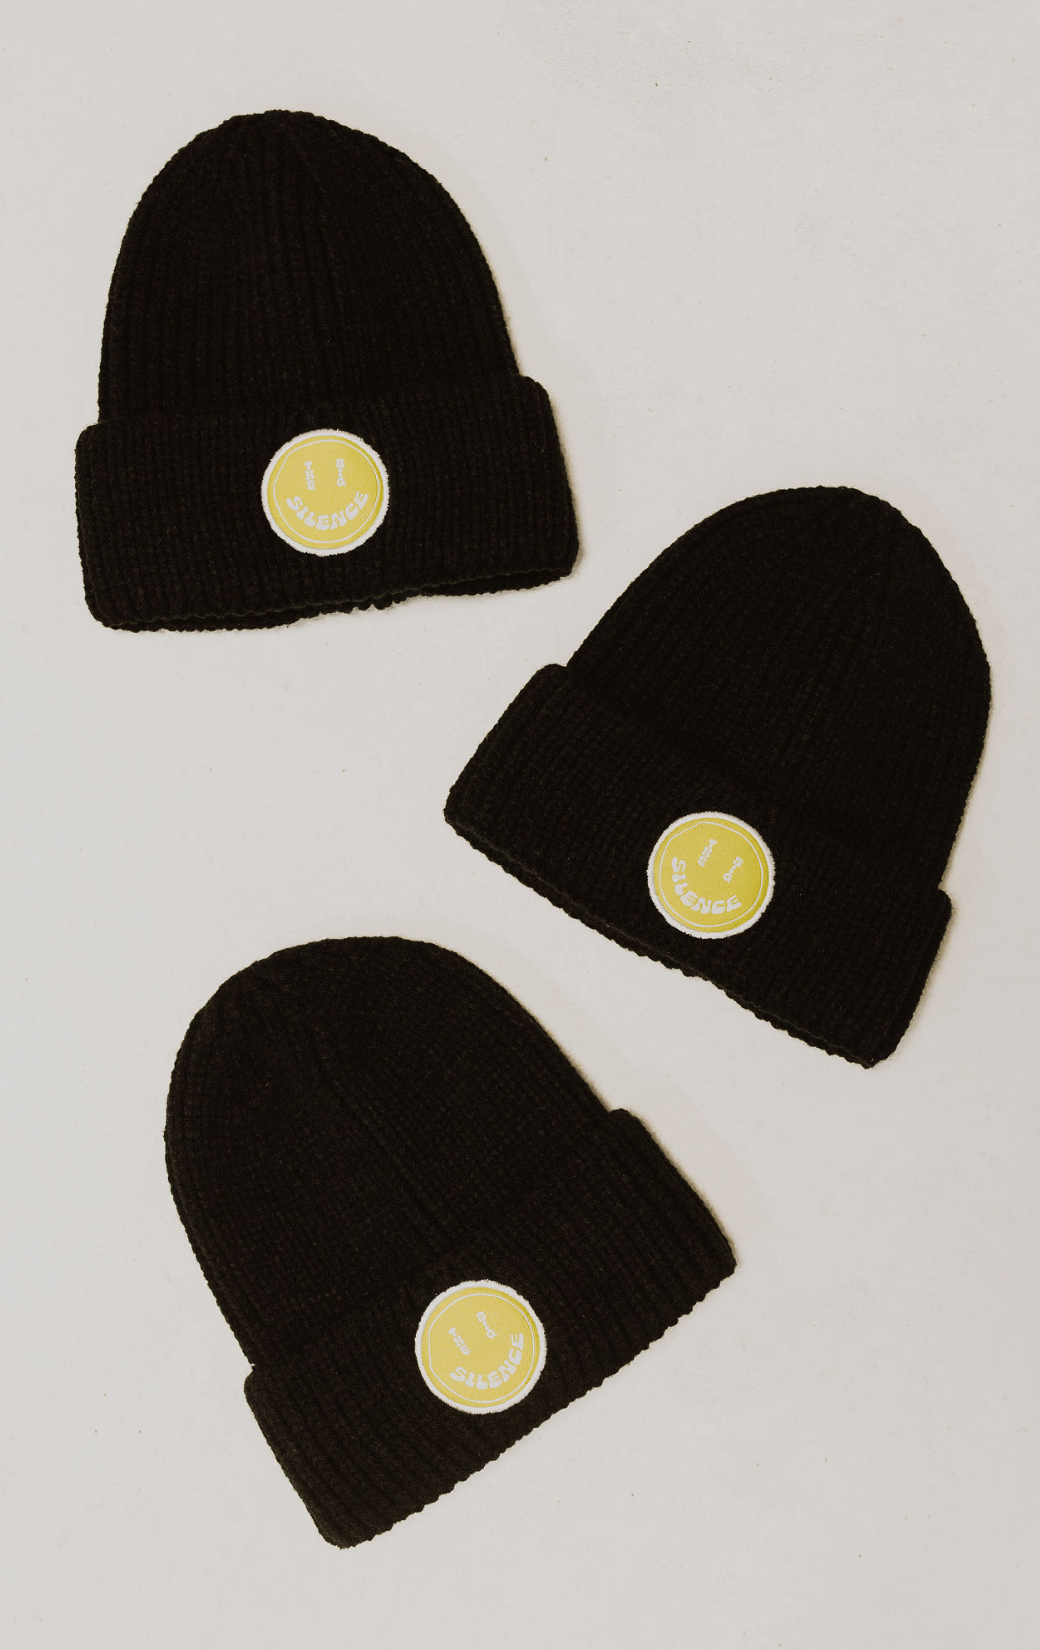 The Smiley Face Beanies